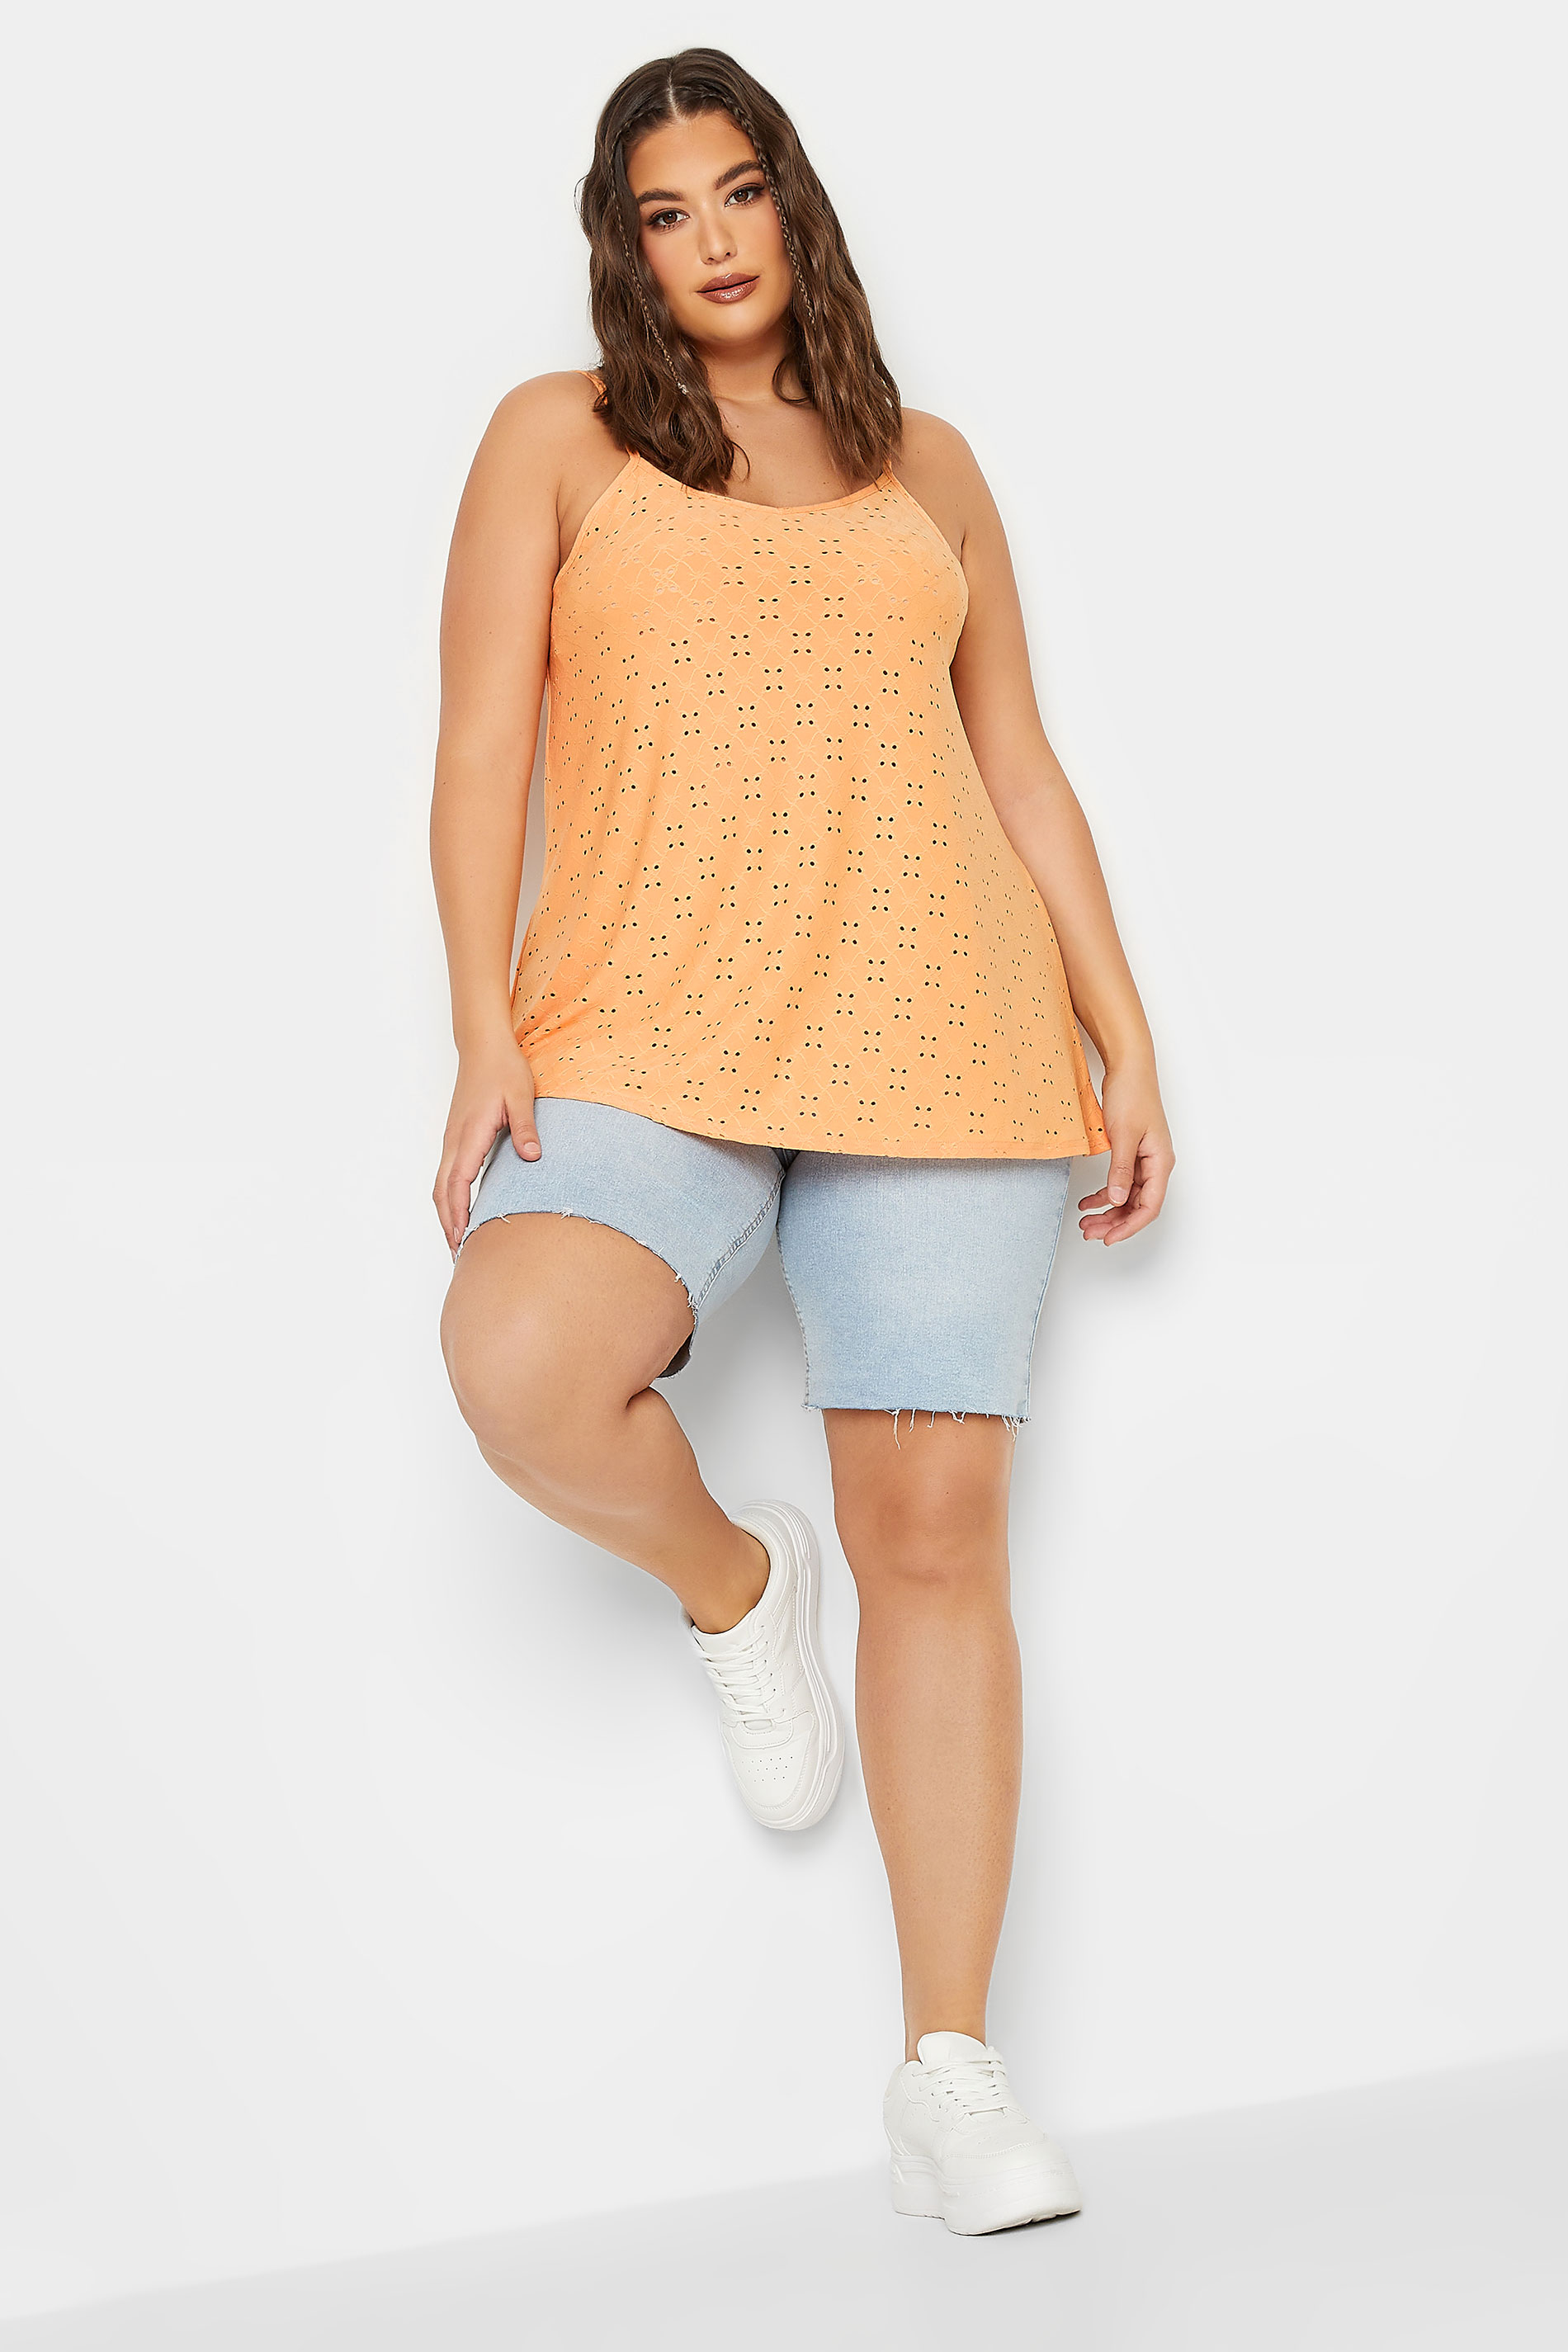 LIMITED COLLECTION Plus Size Orange Broderie Anglaise Cami Vest Top | Yours Clothing 2